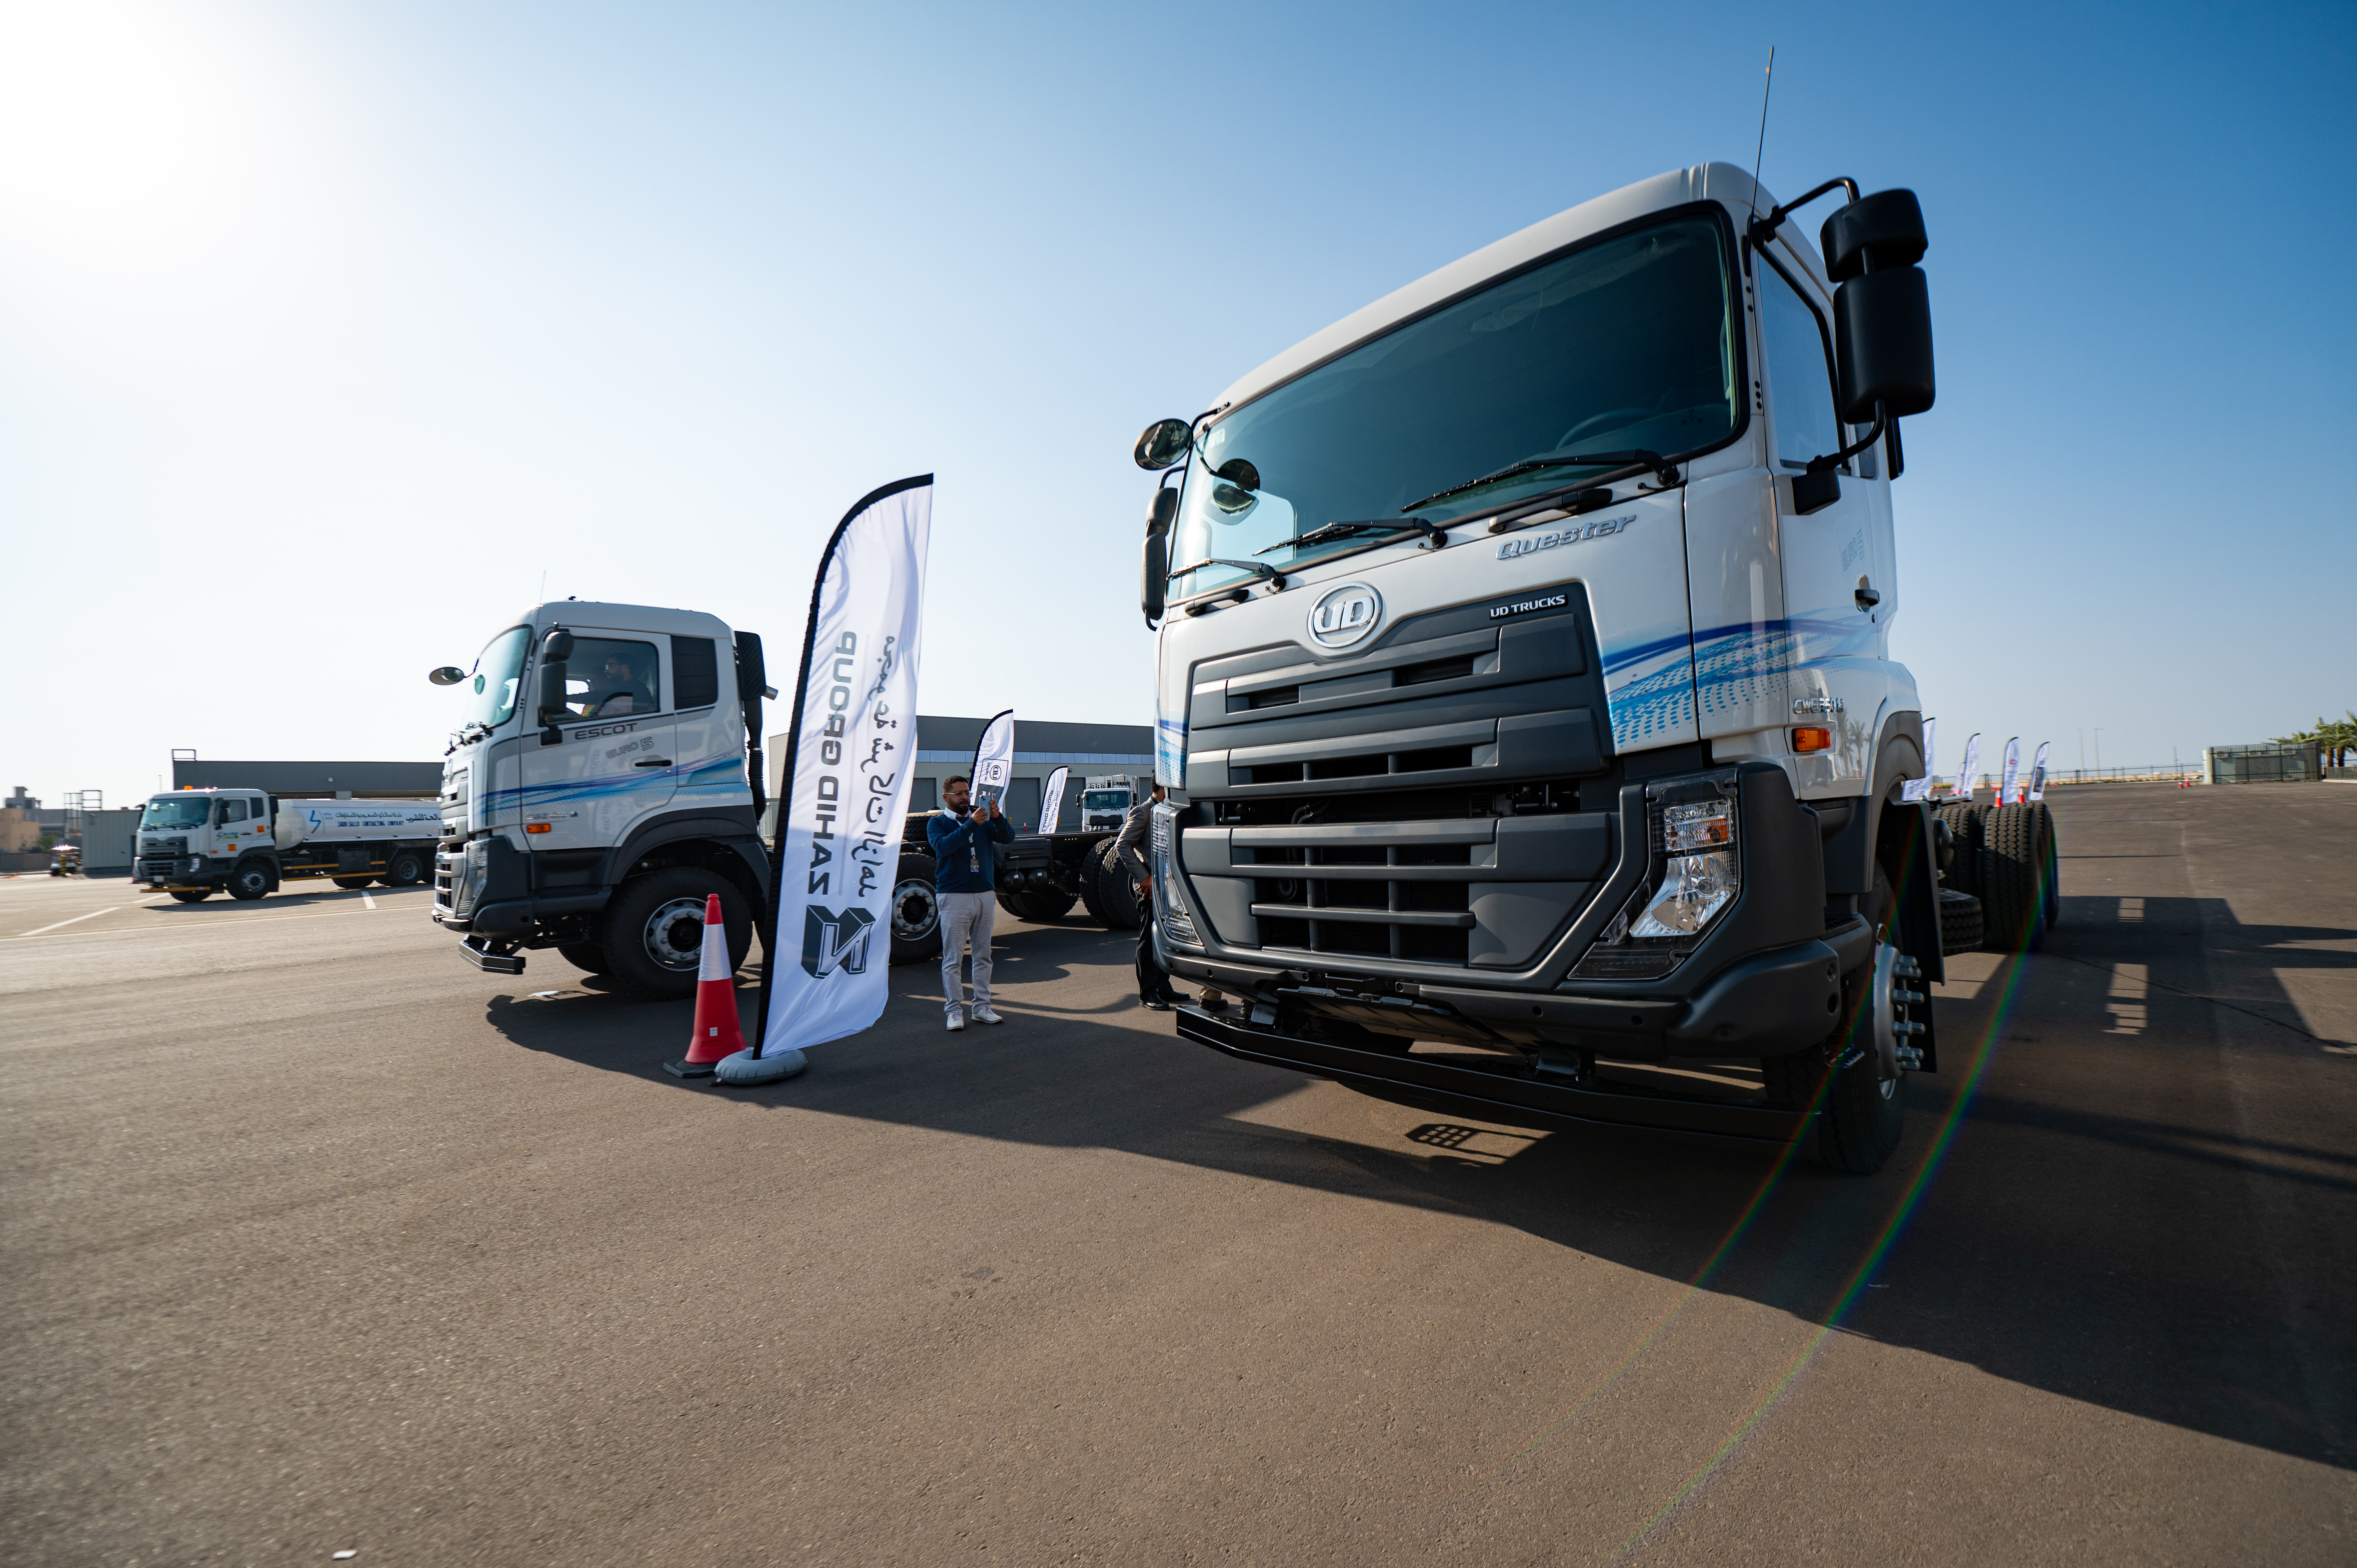 Euro 5 Trucks Displayed and Tested by the Attendees